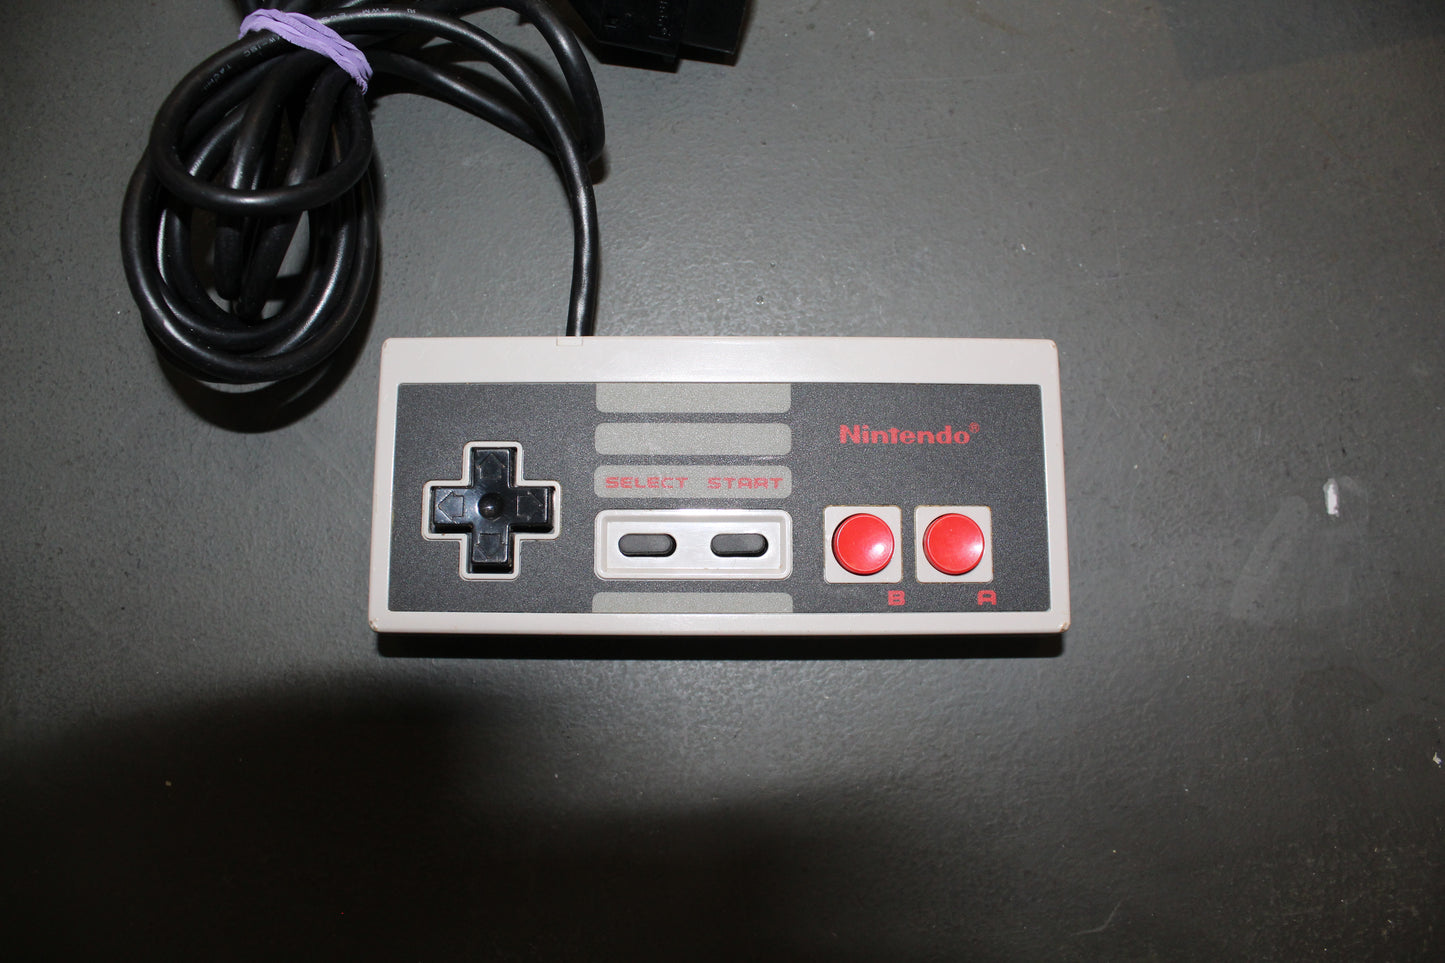 Nintendo Entertainment System (NES) Console With wires and controller